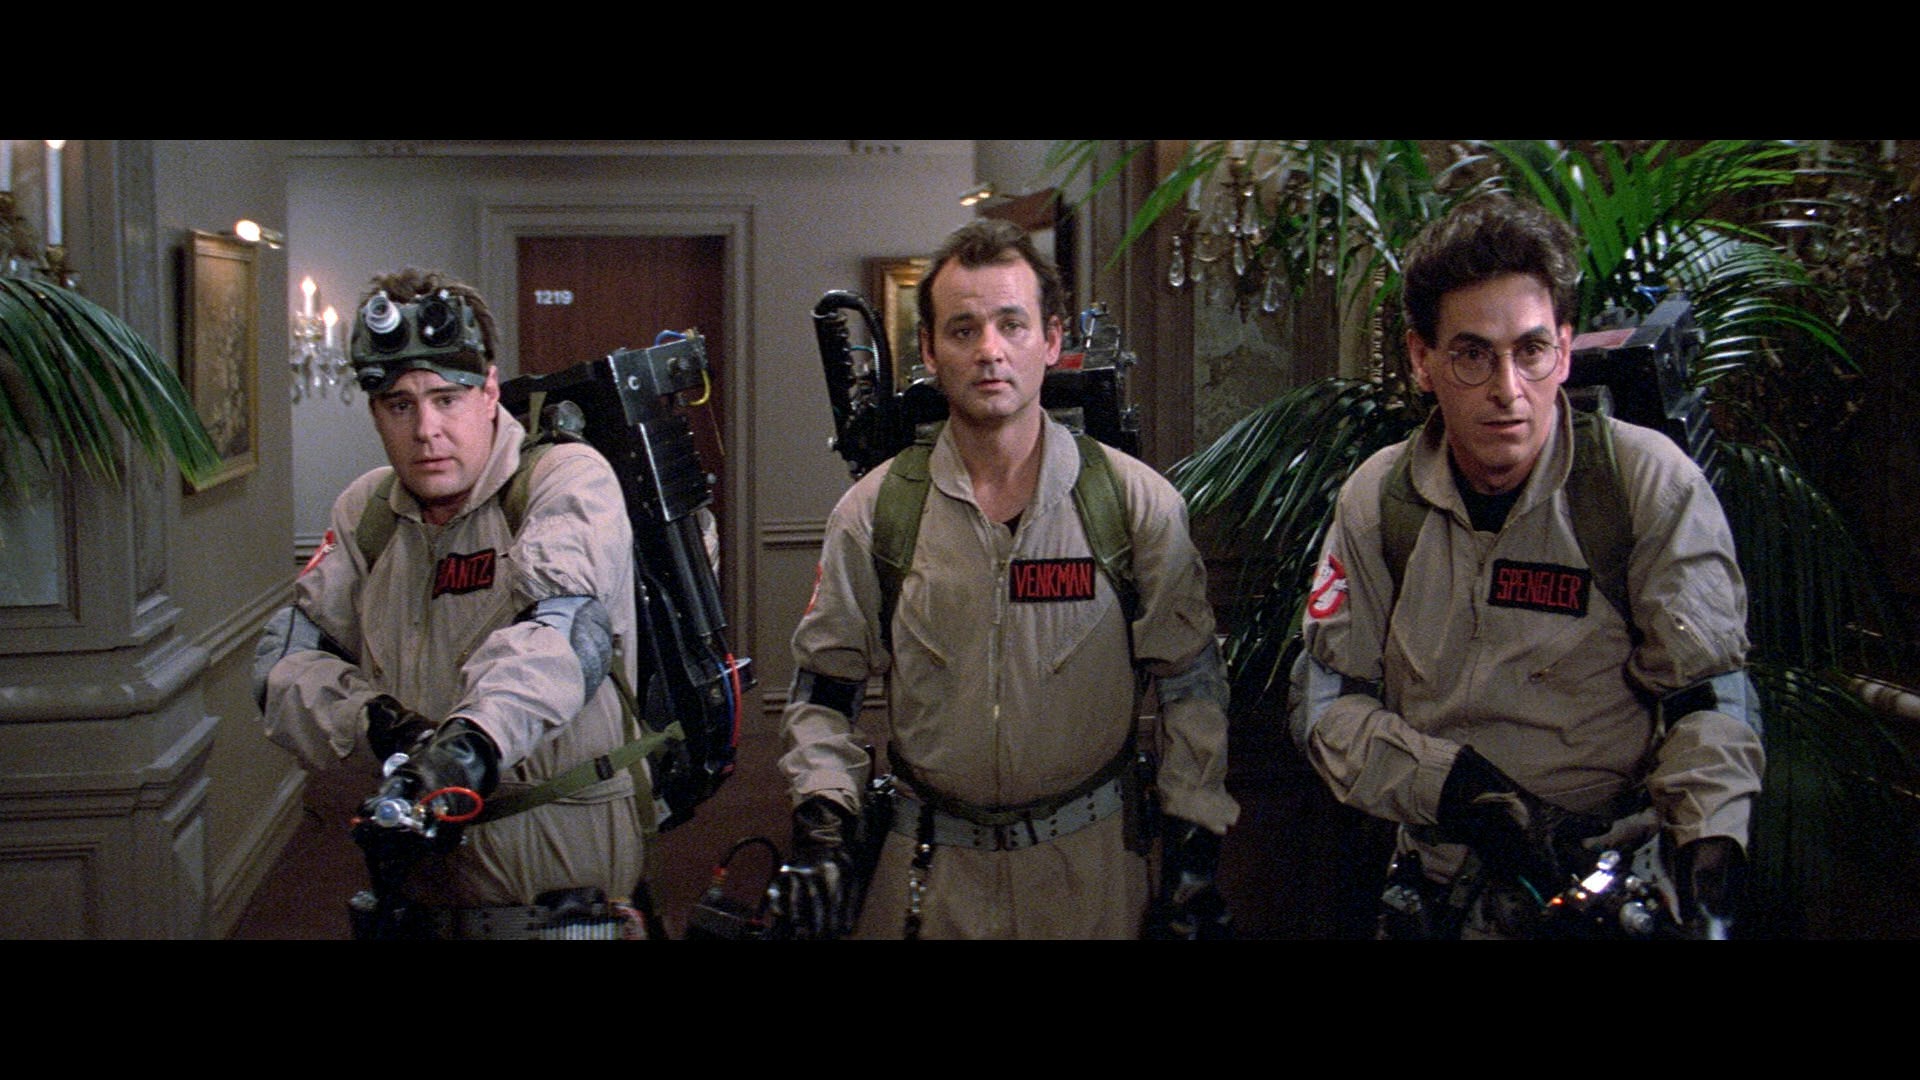 Download background ghostbusters, movie, lost boys